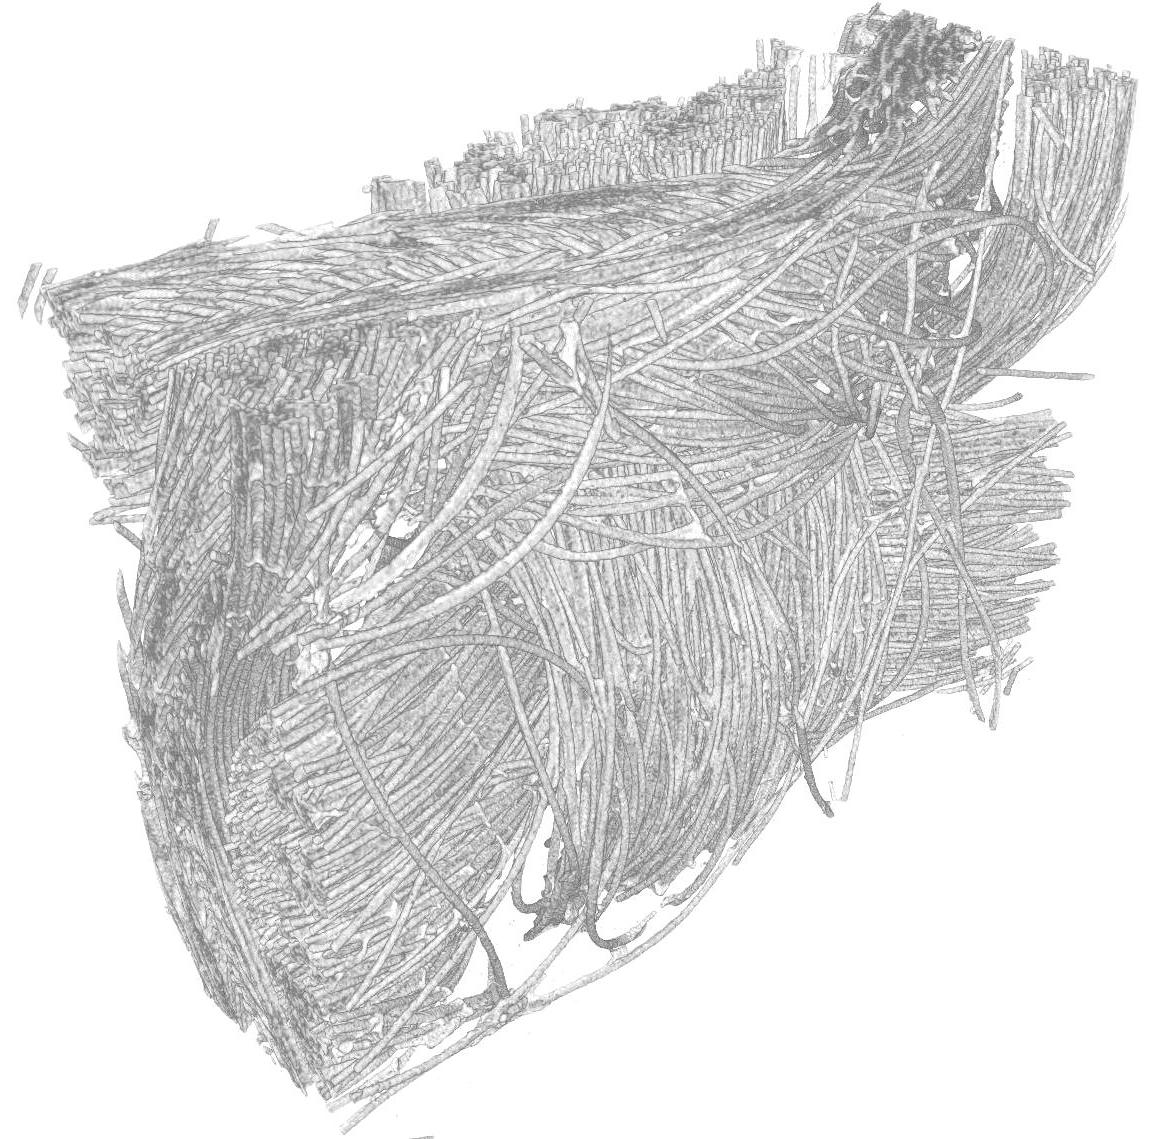 X-Ray Computed Tomography Data of a Carbon Cloth